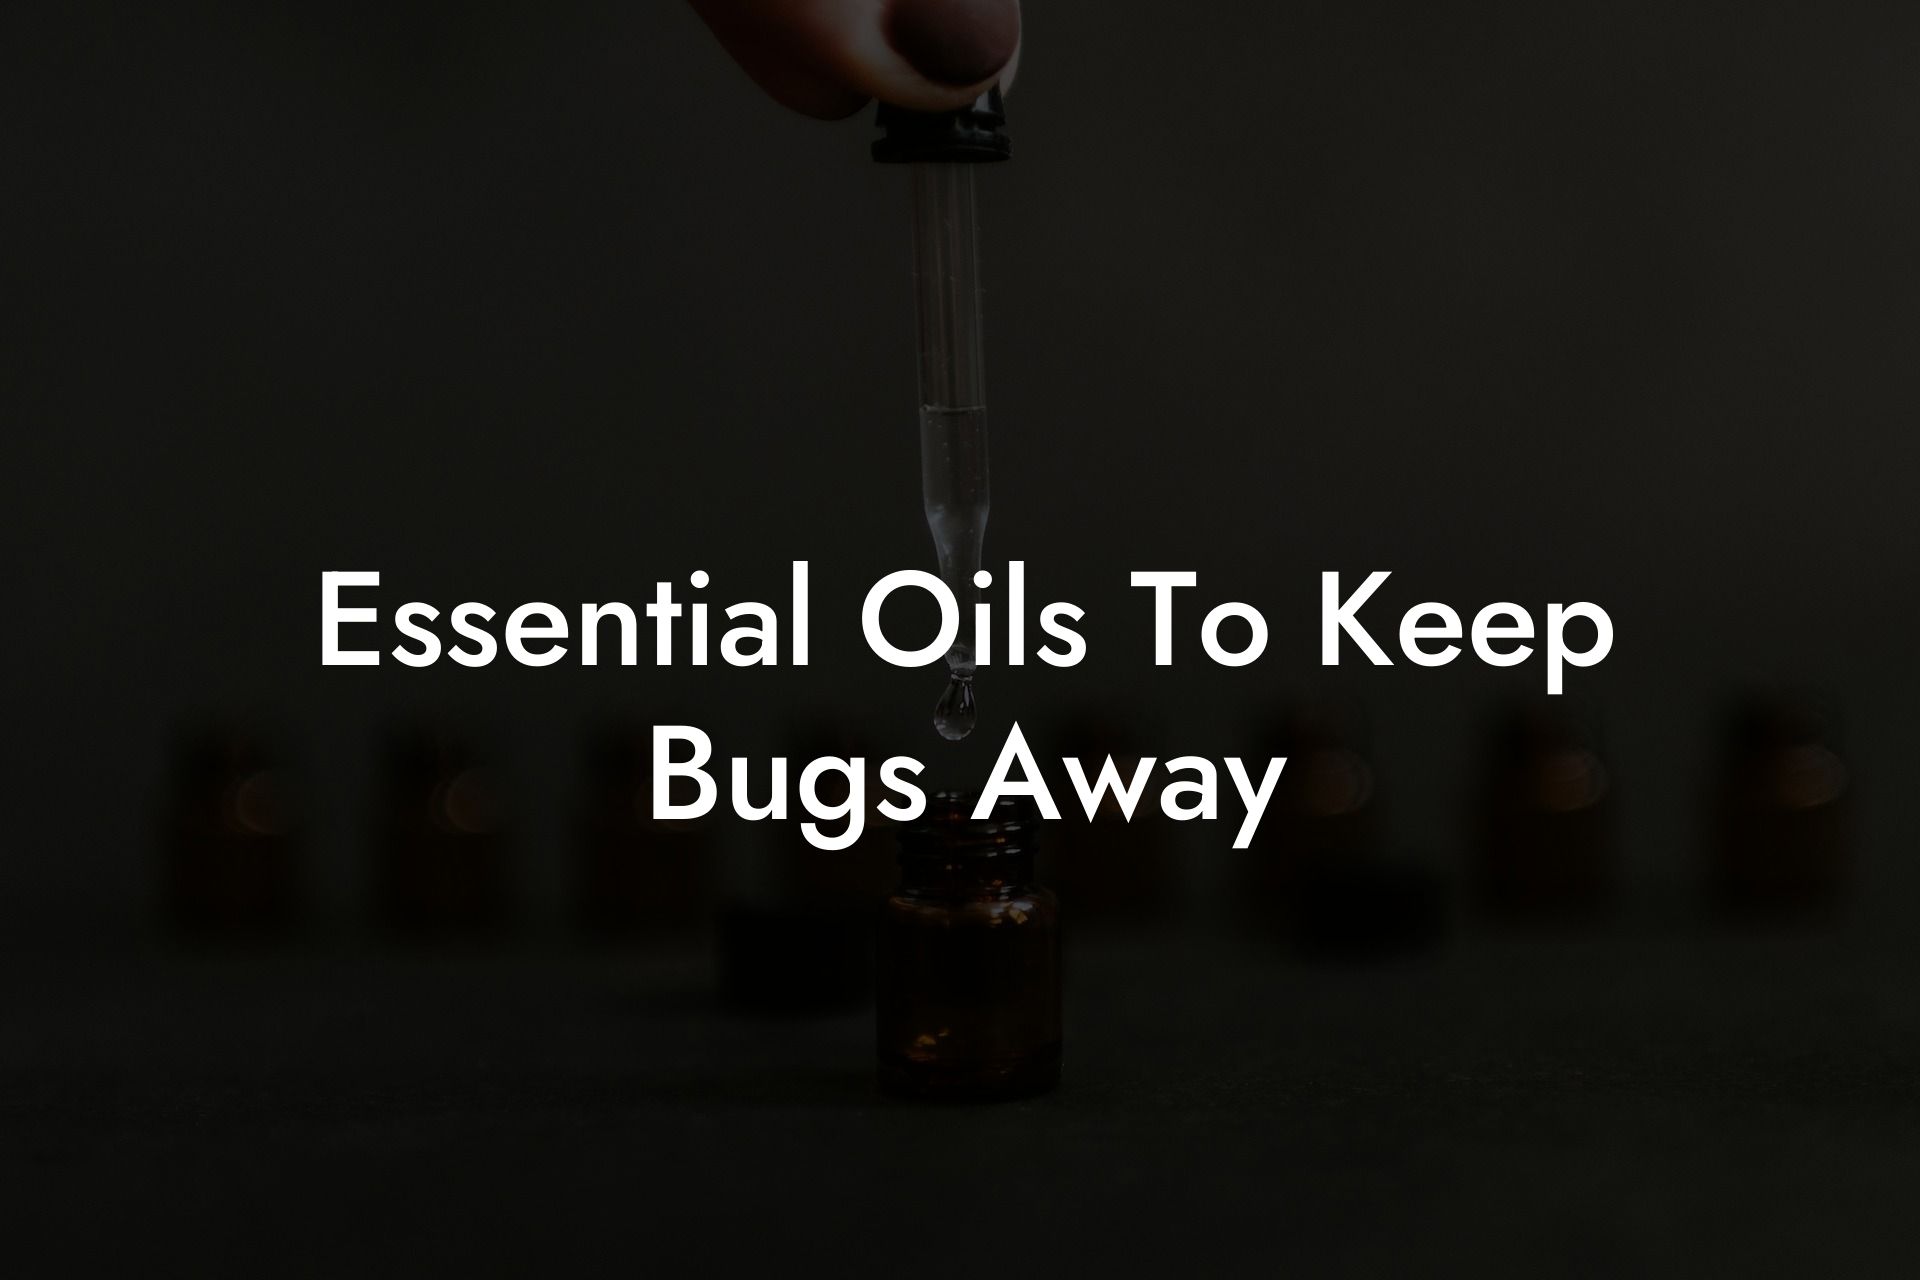 Essential Oils To Keep Bugs Away